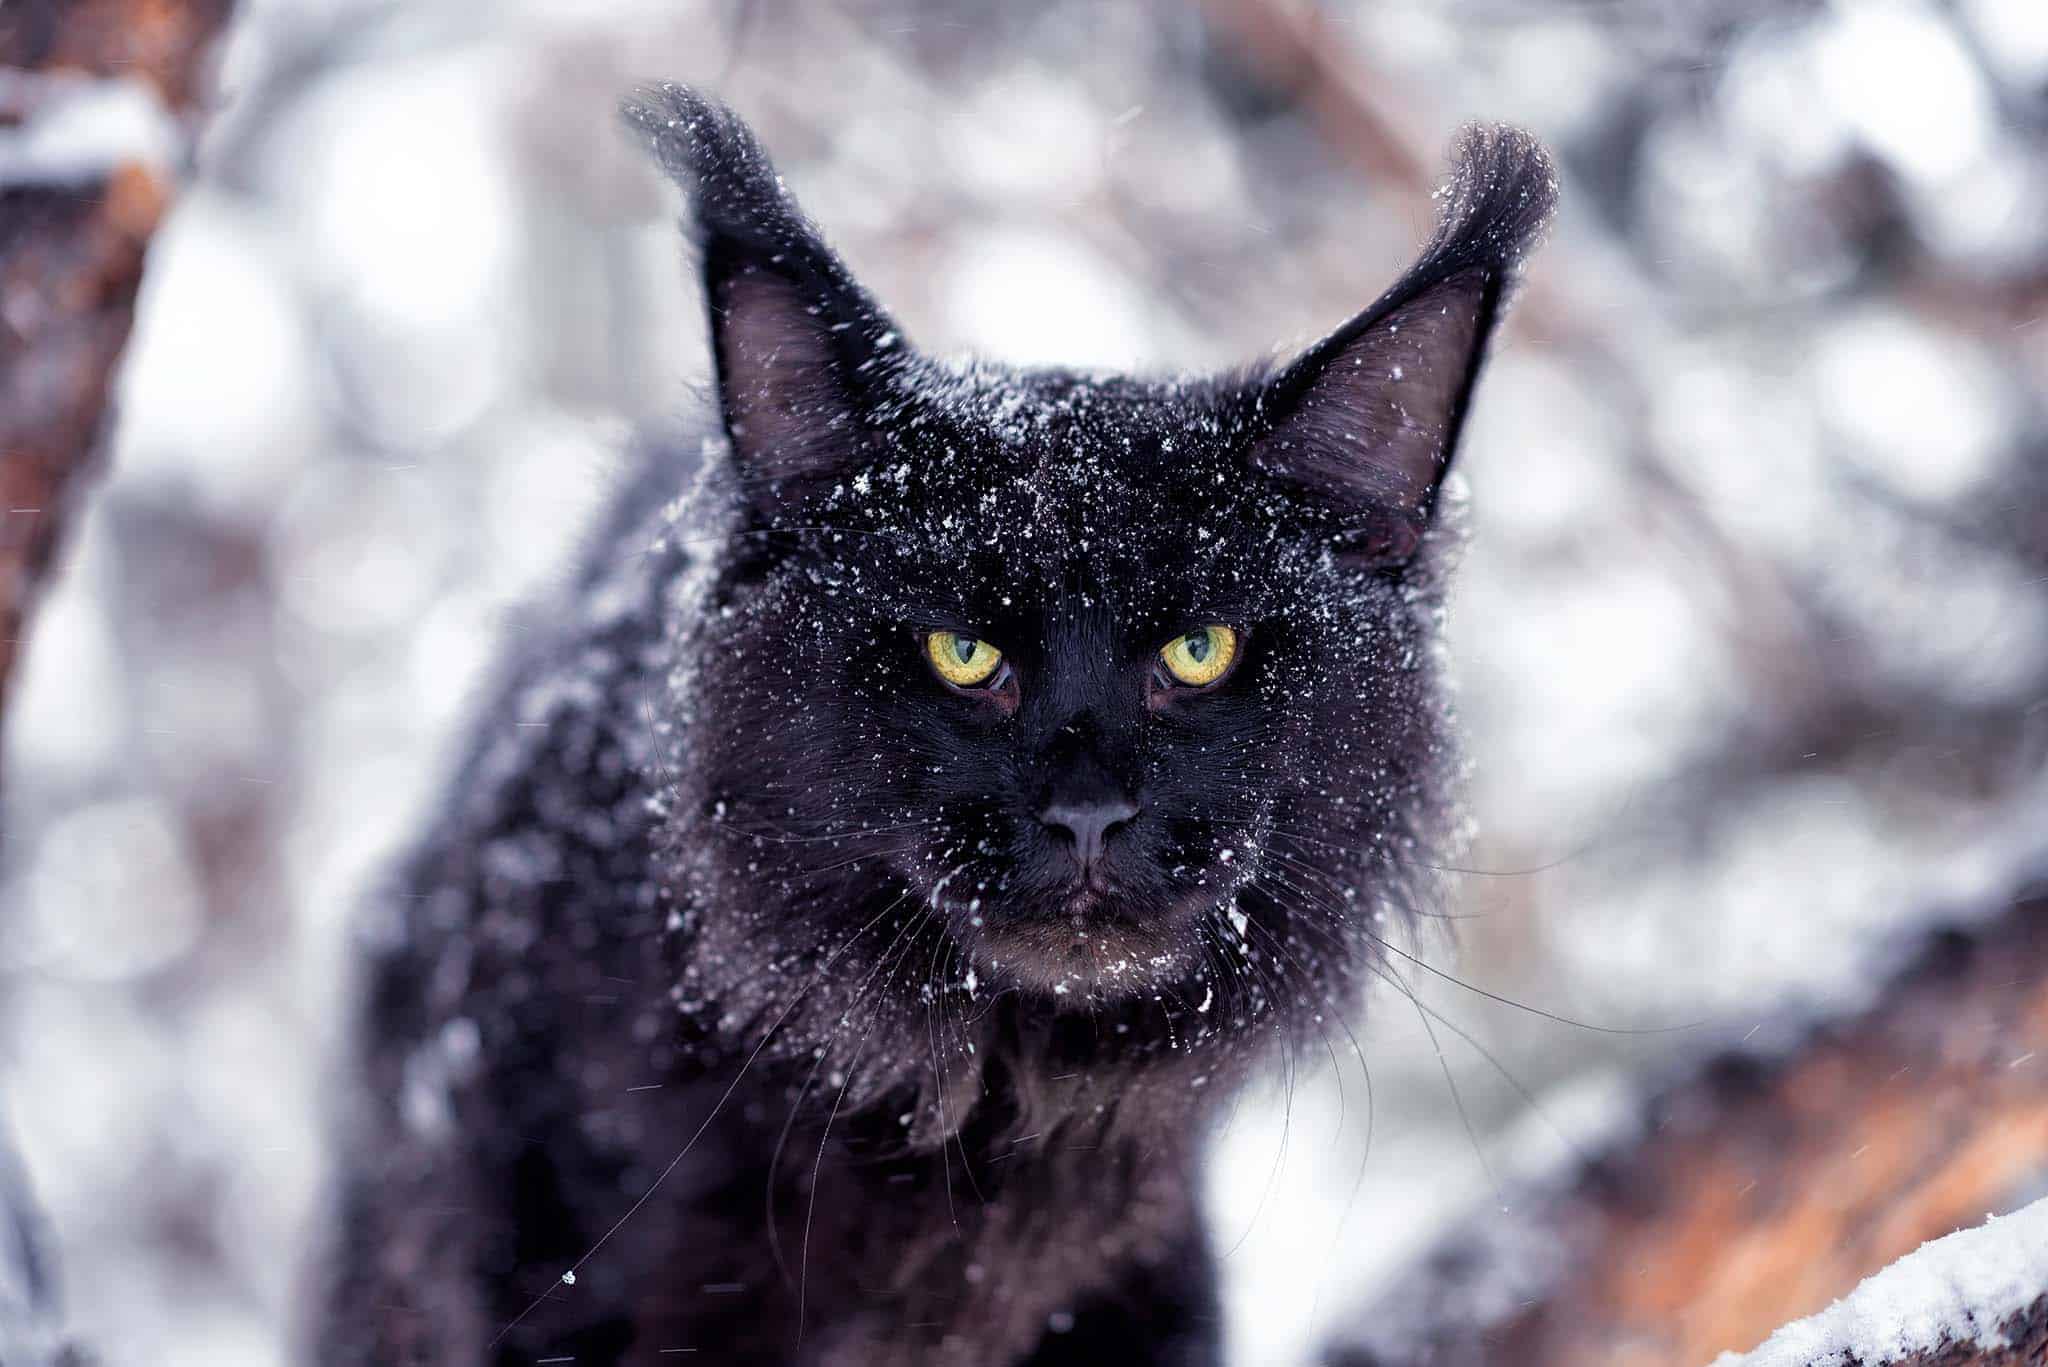 A cat in the snow